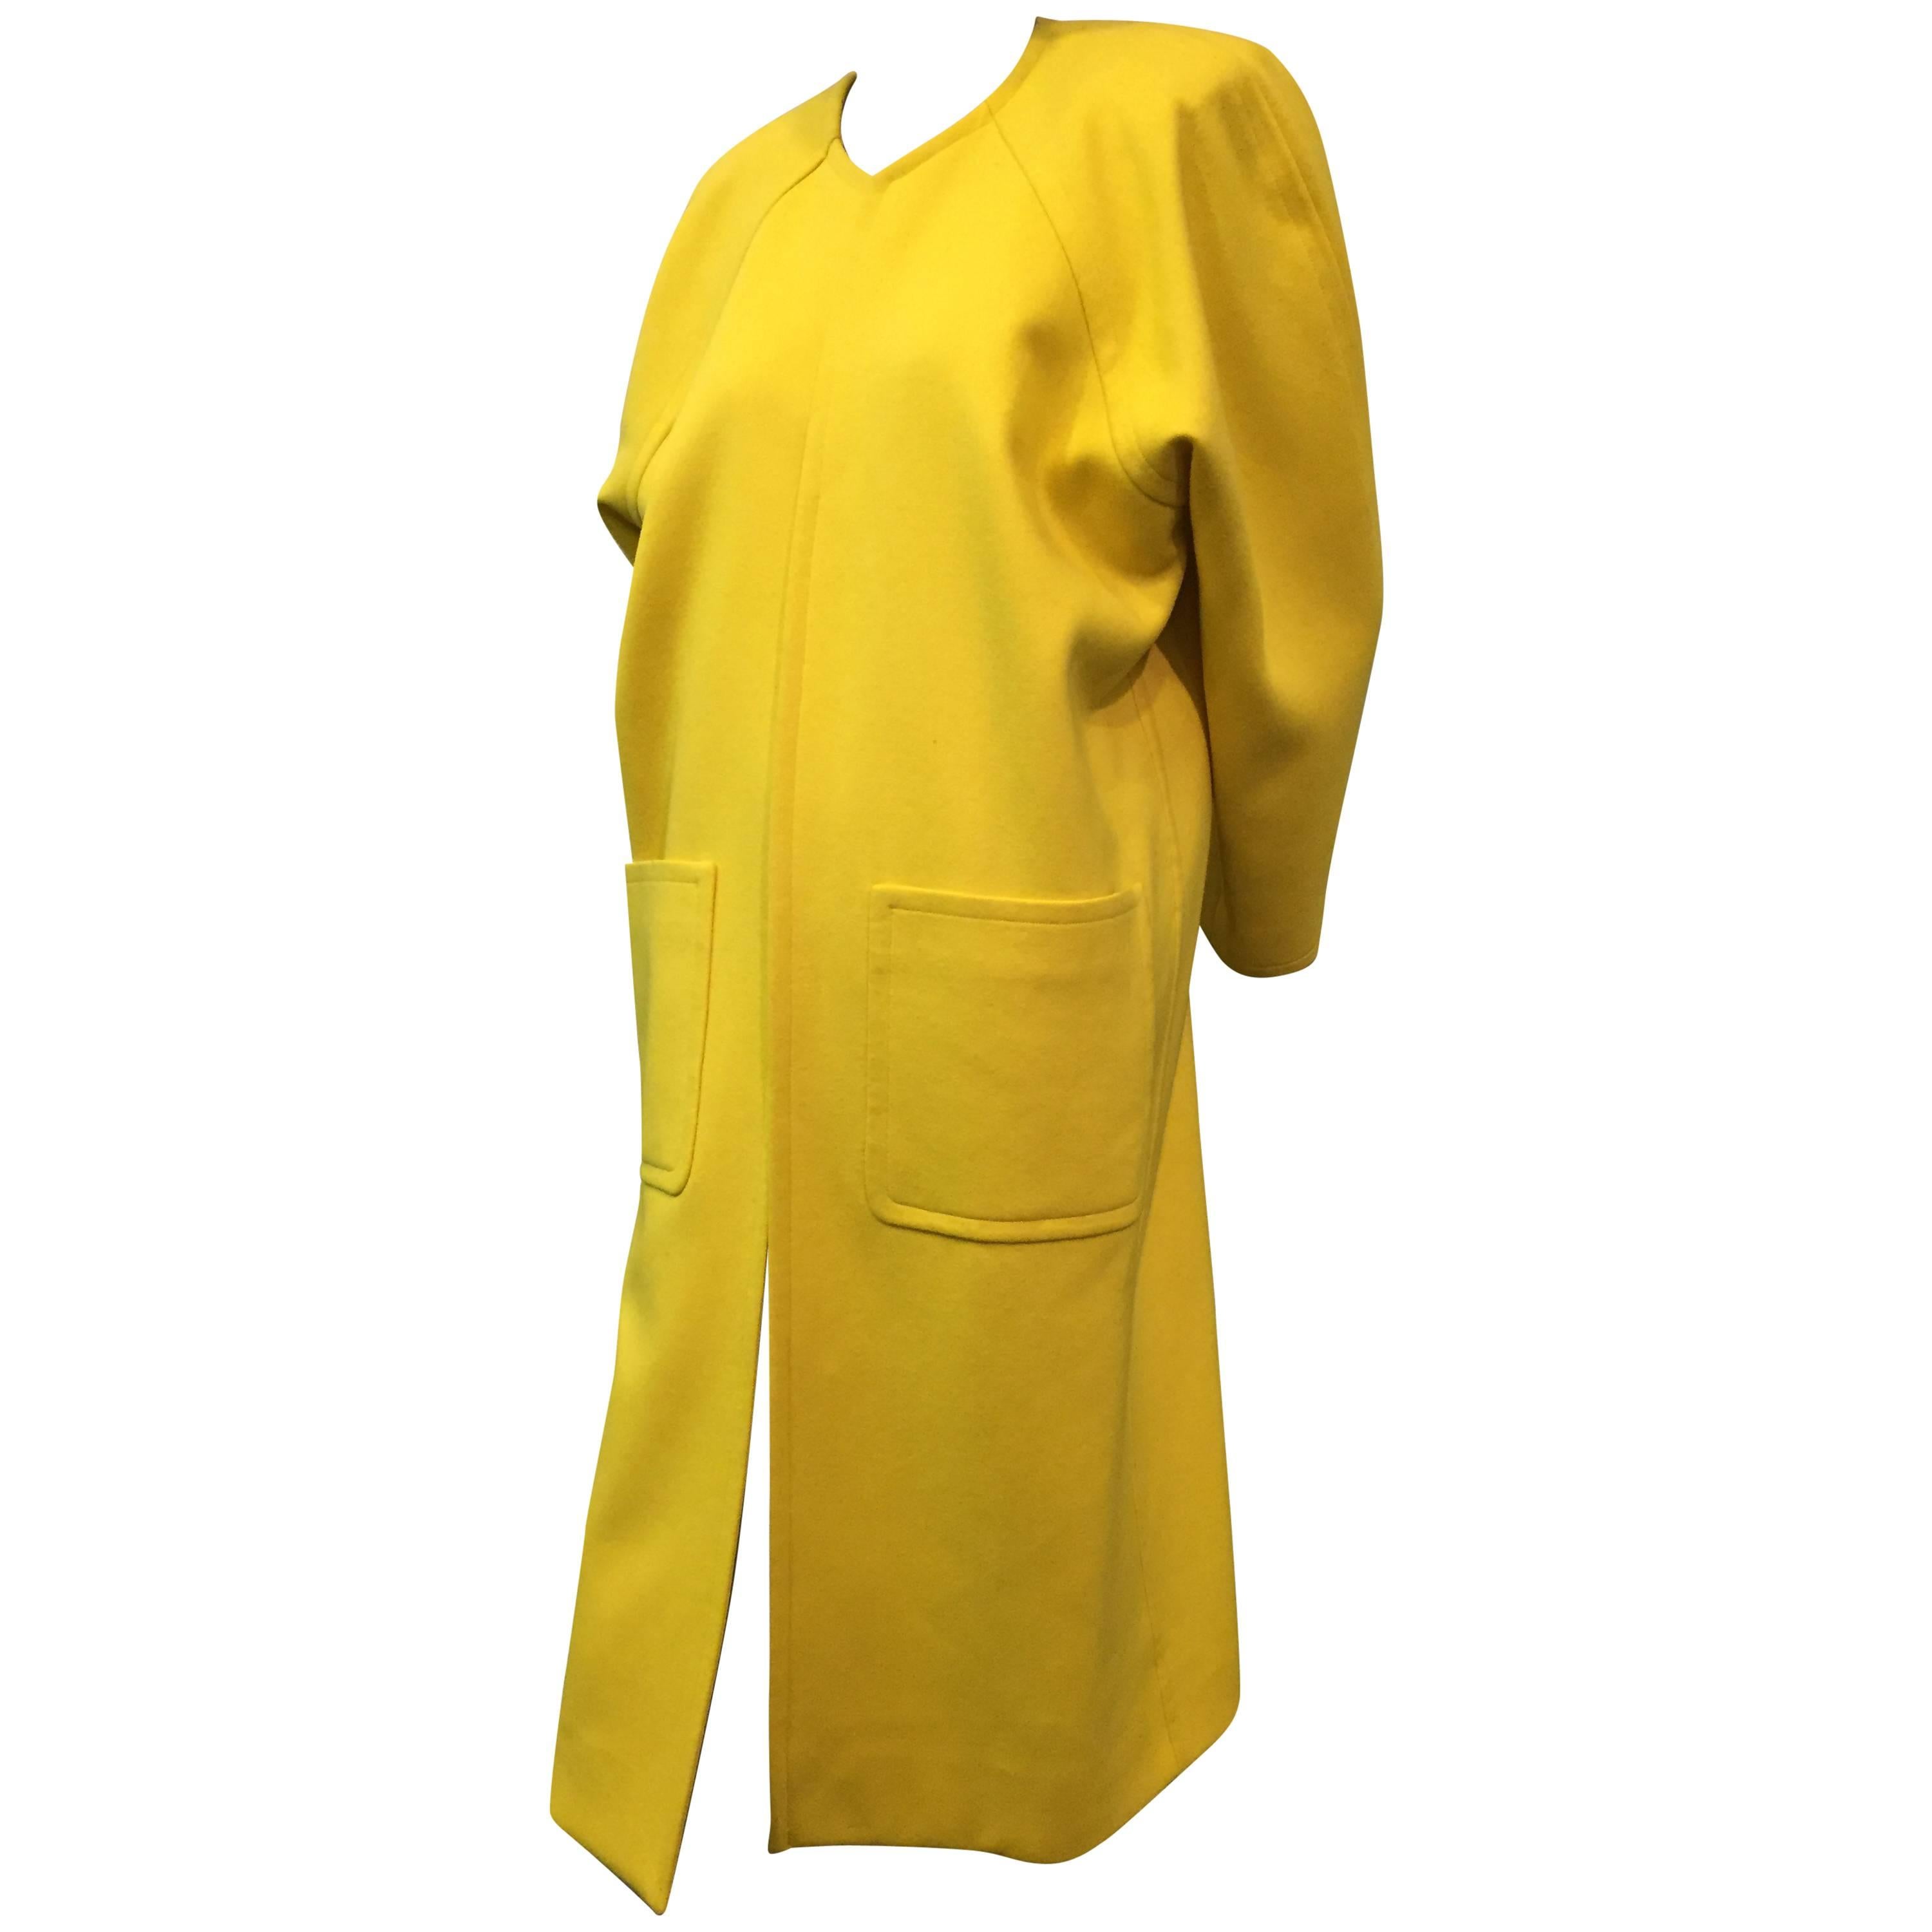 1980s Canary Yellow Wool Coat with Deep Hip Pockets and Raglan Sleeves